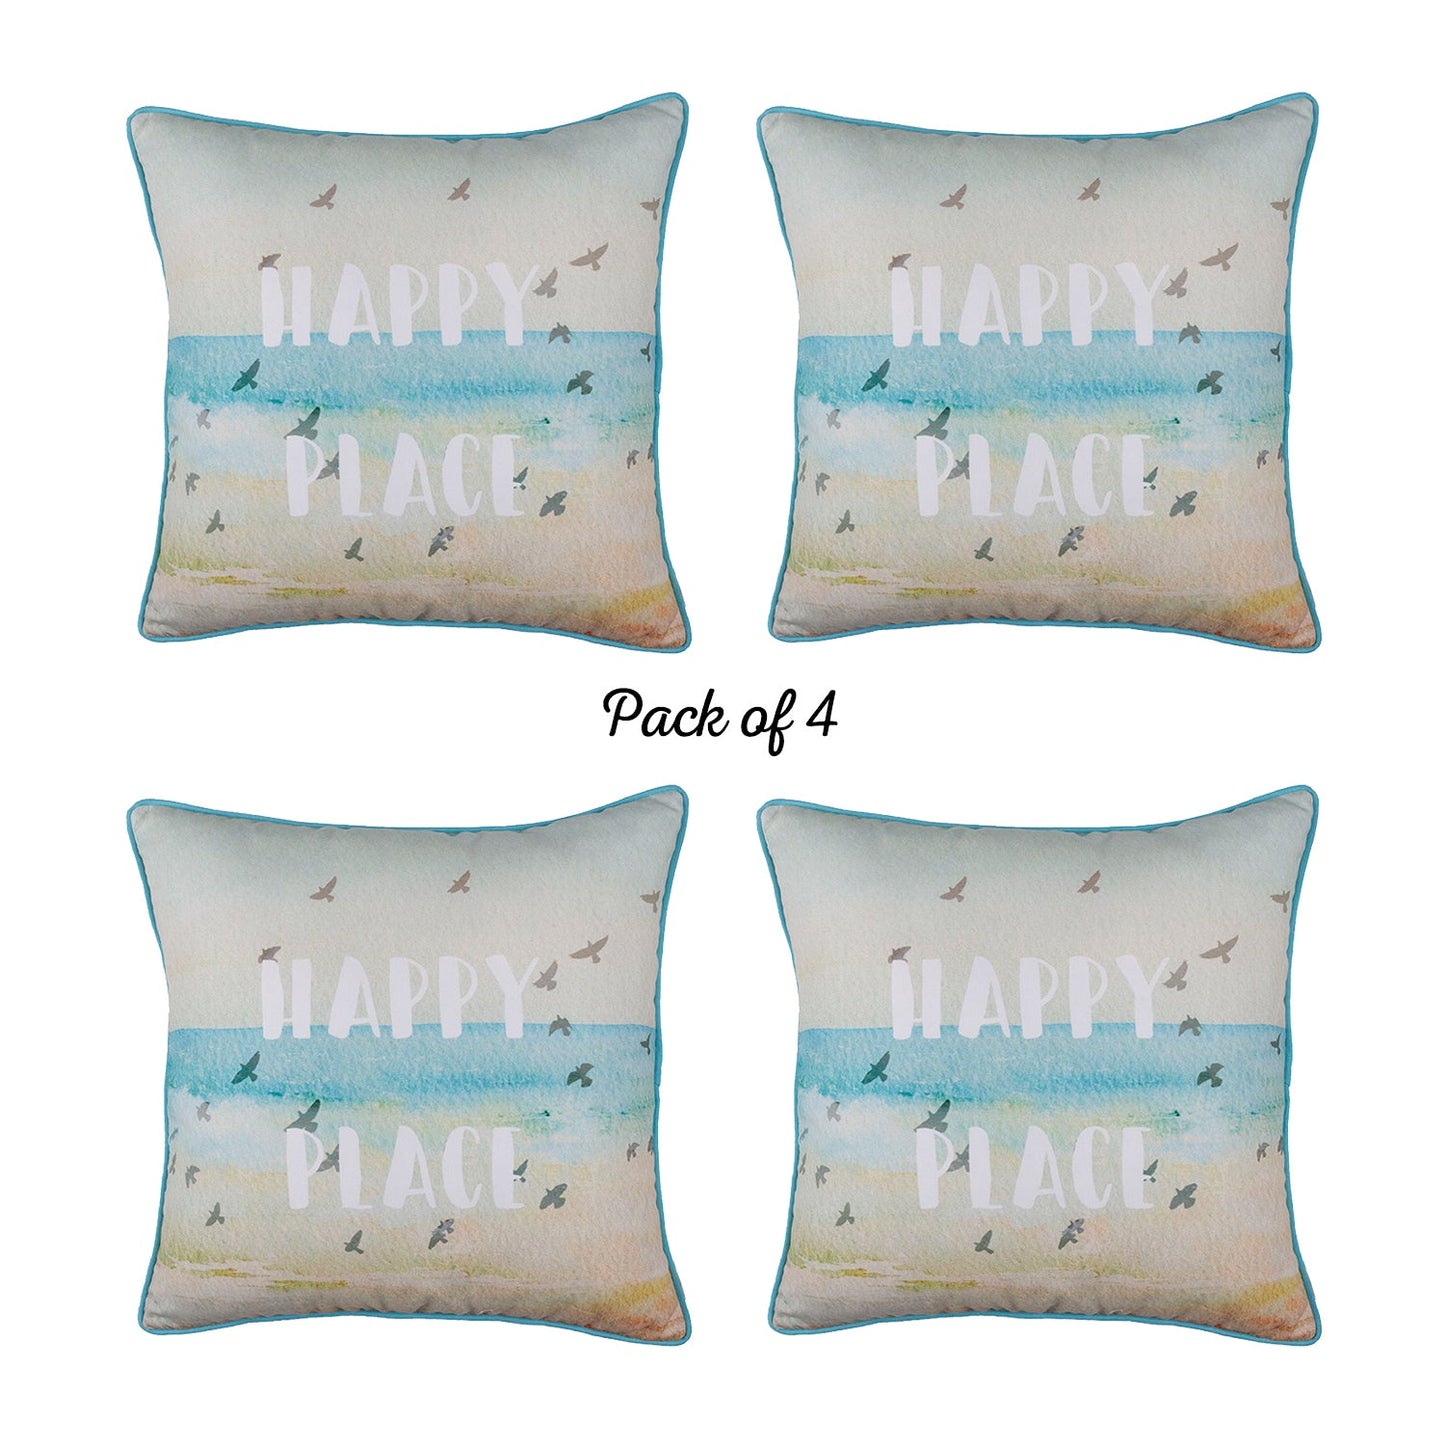 Marine Square Quote Square 18" Throw Pillow Cover (Set of 4)